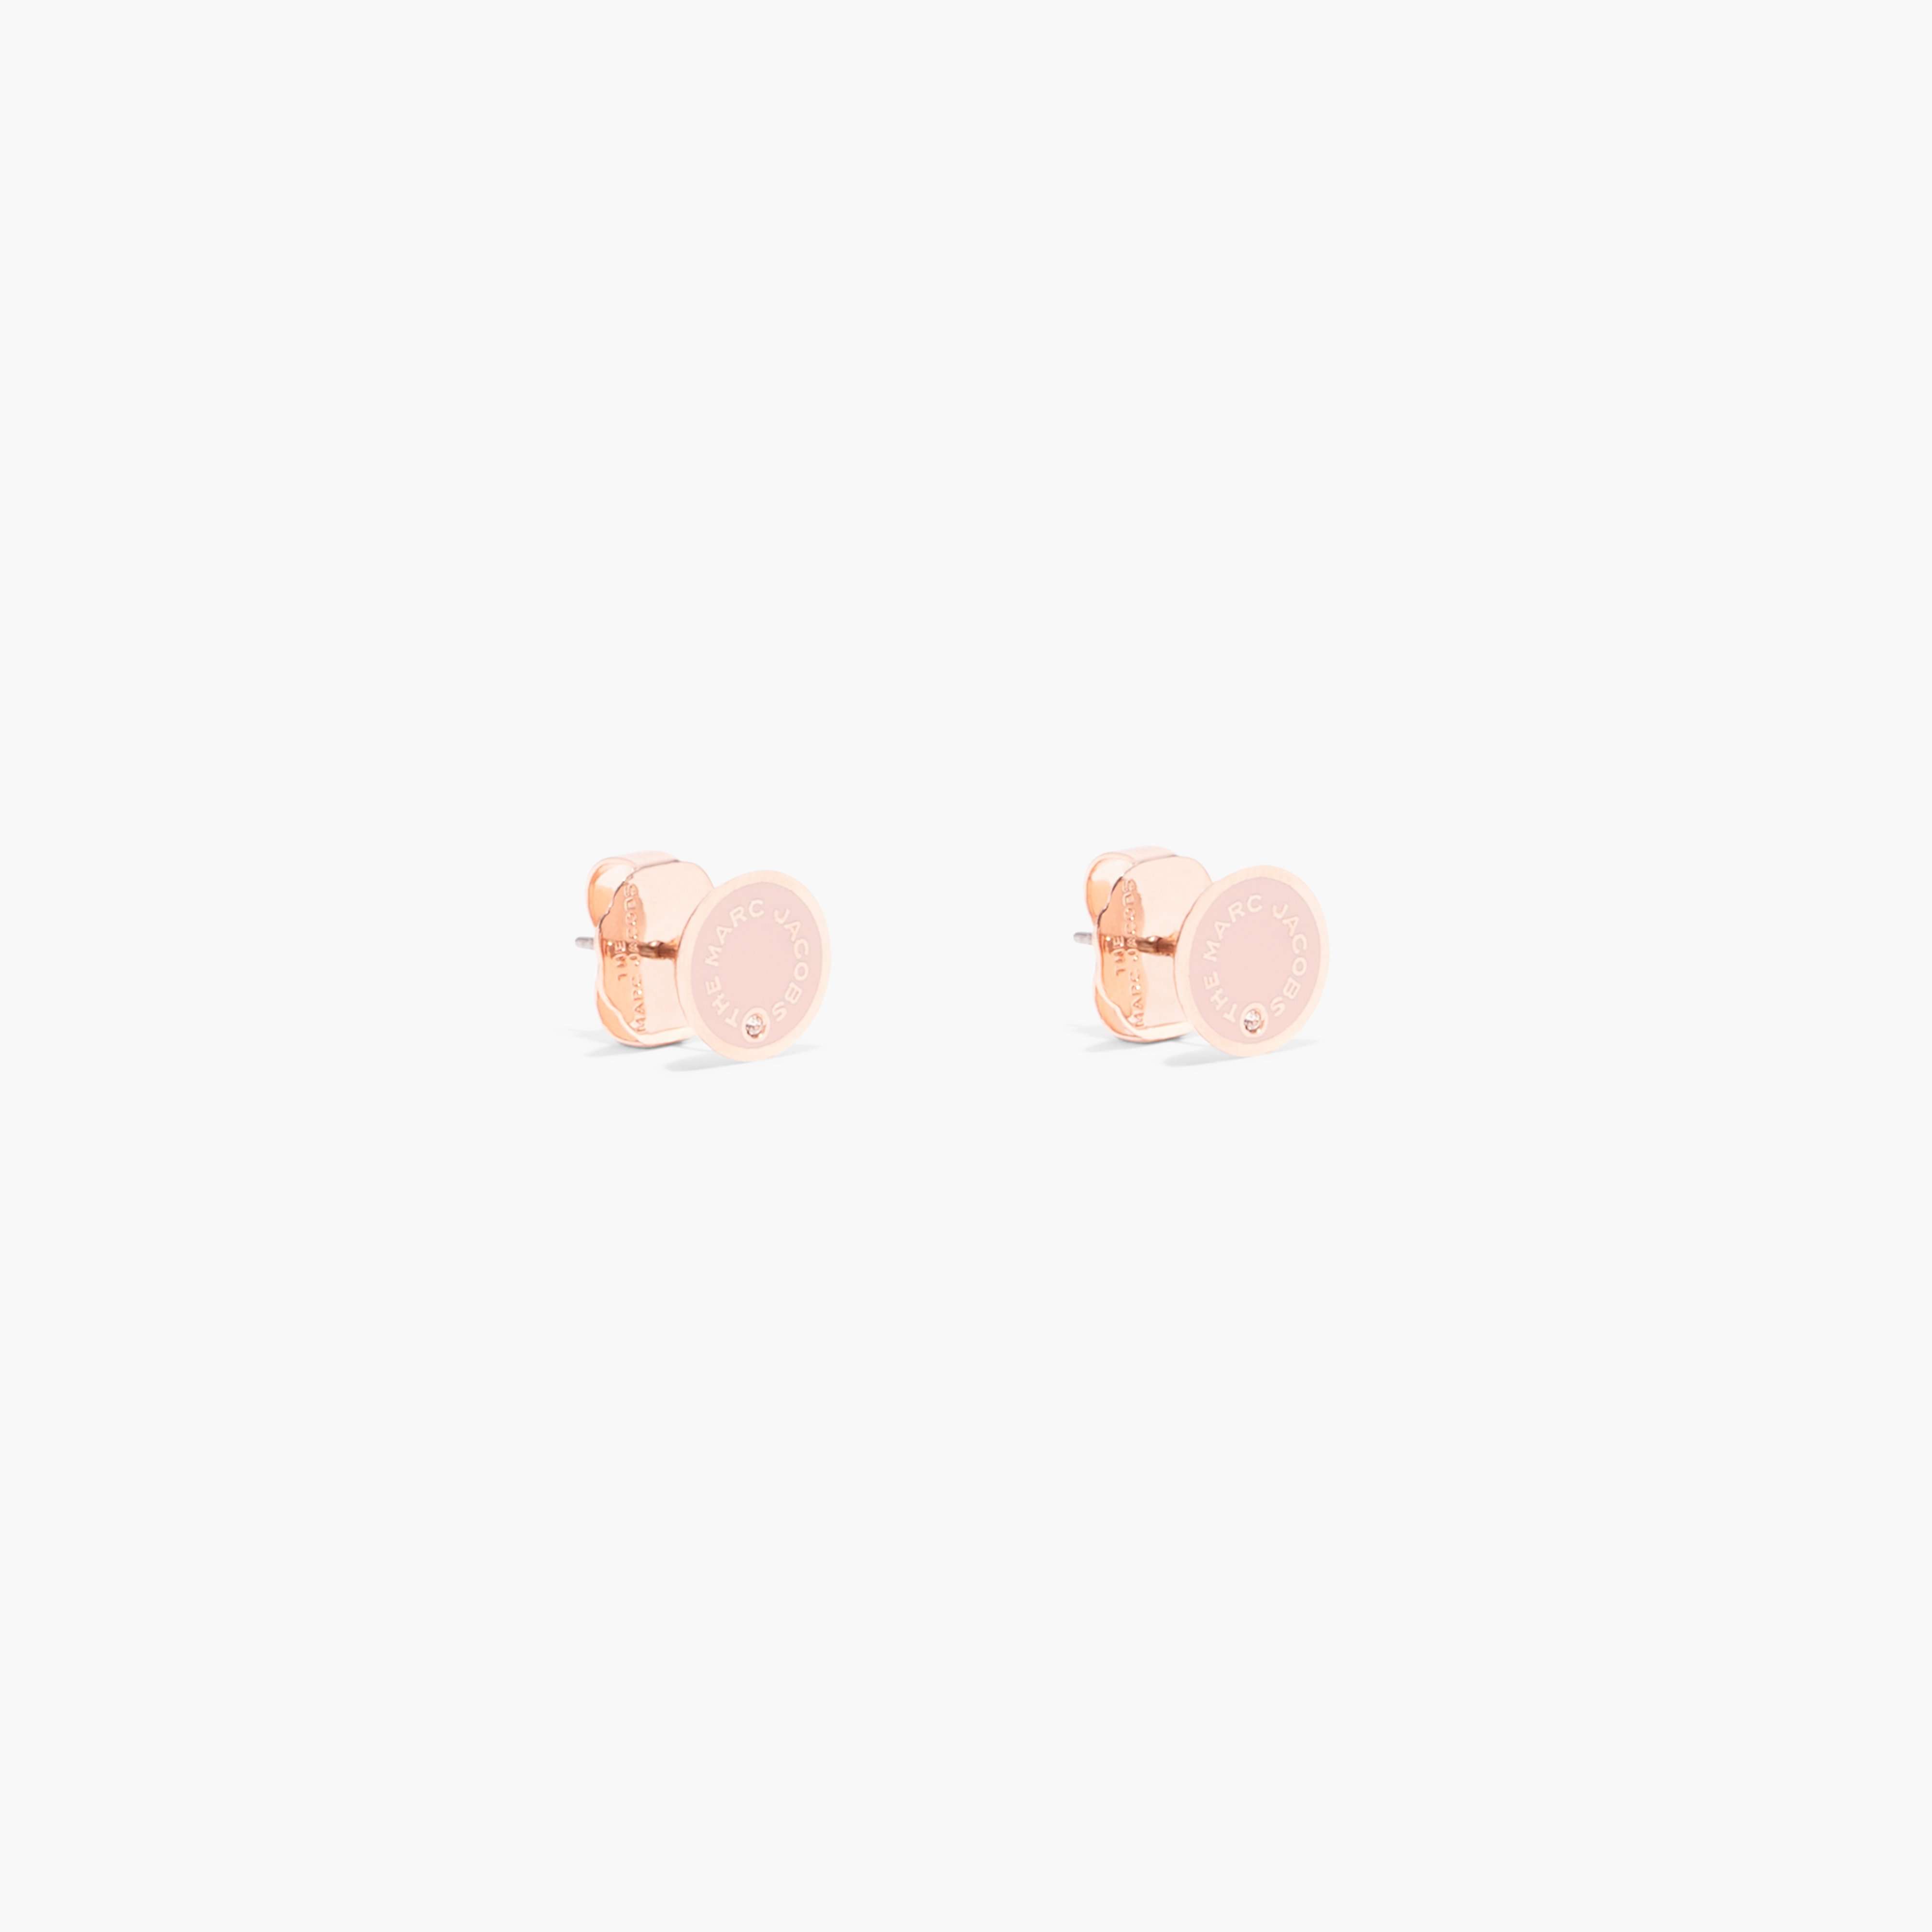 The Medallion Studs in Sand/Rose Gold